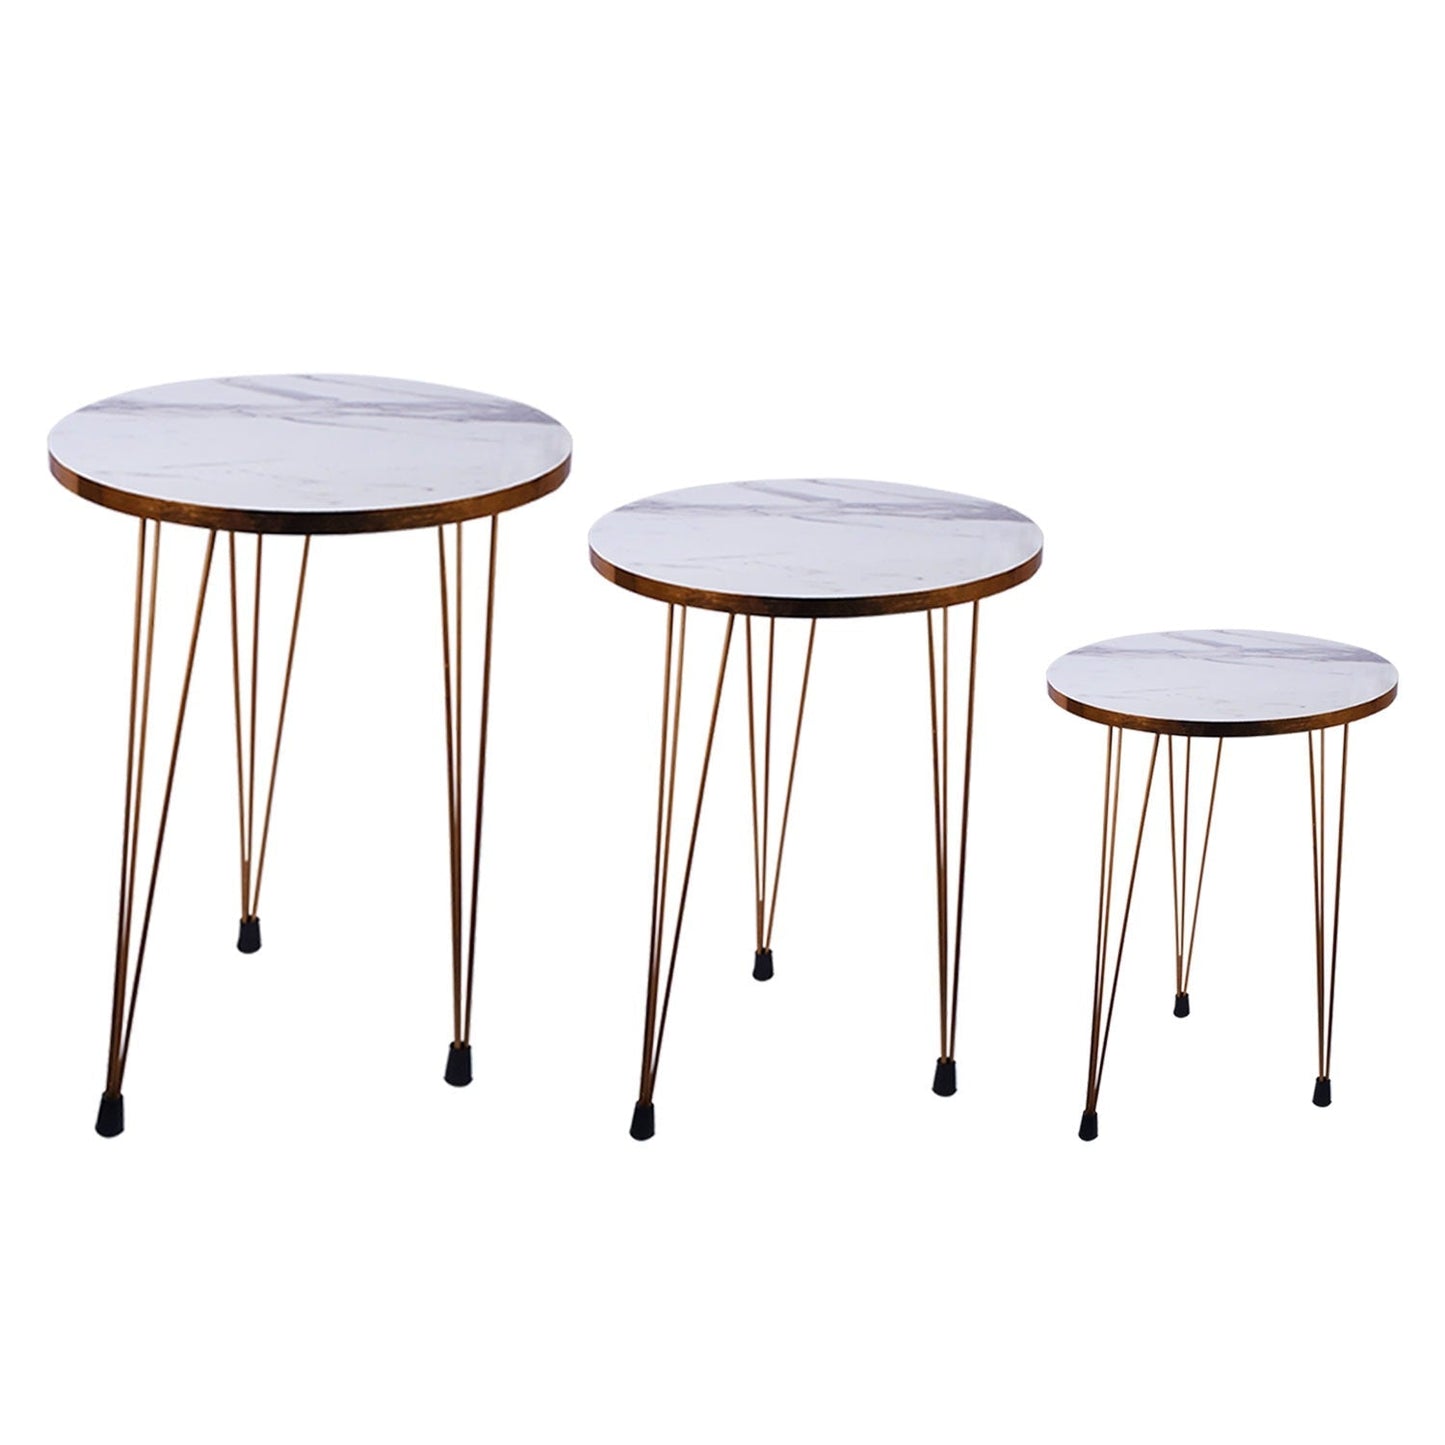 Decorative Home Decor Wooden Round Nesting Side Tables 3 Sizes Set